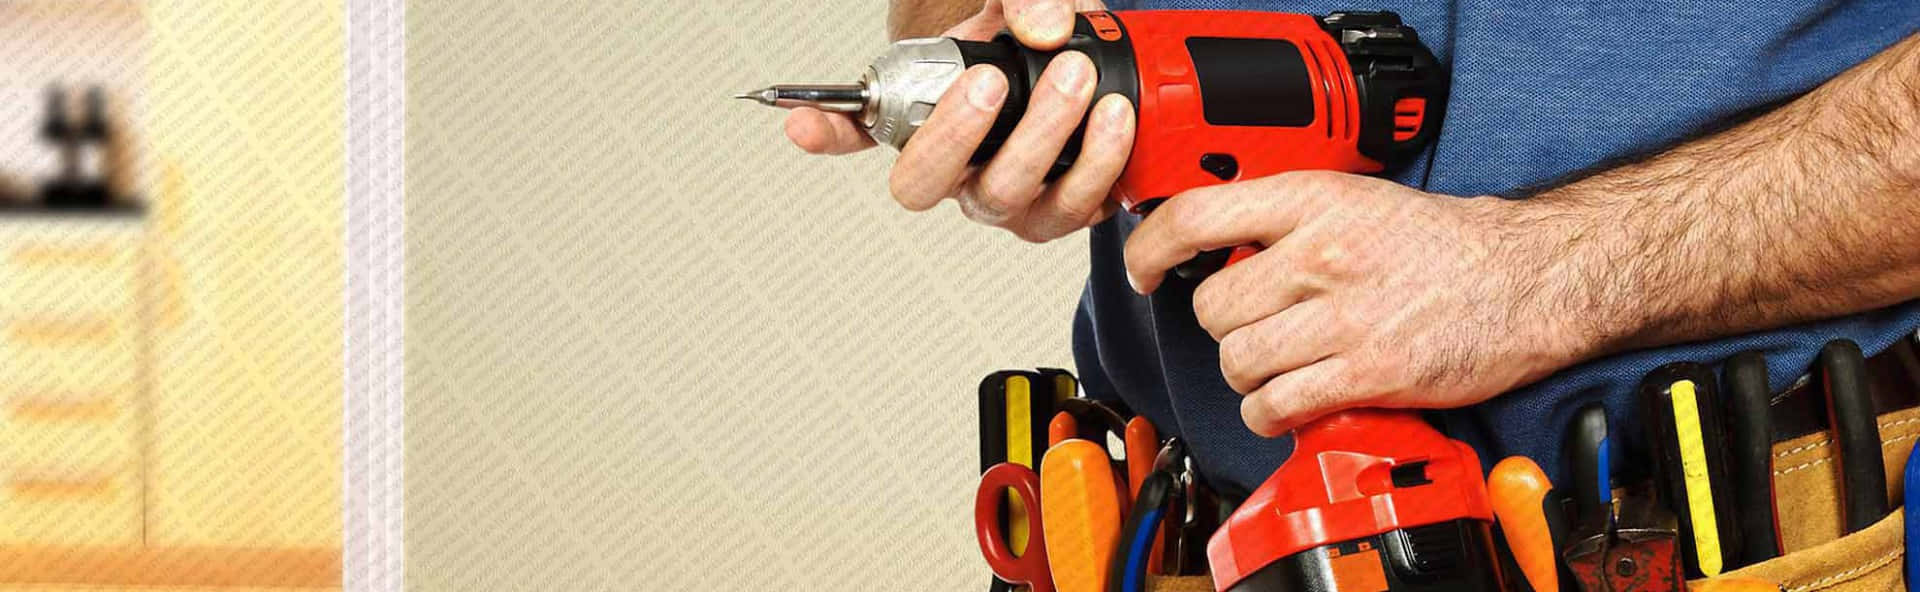 Handyman Fixing Electrical Issues Wallpaper